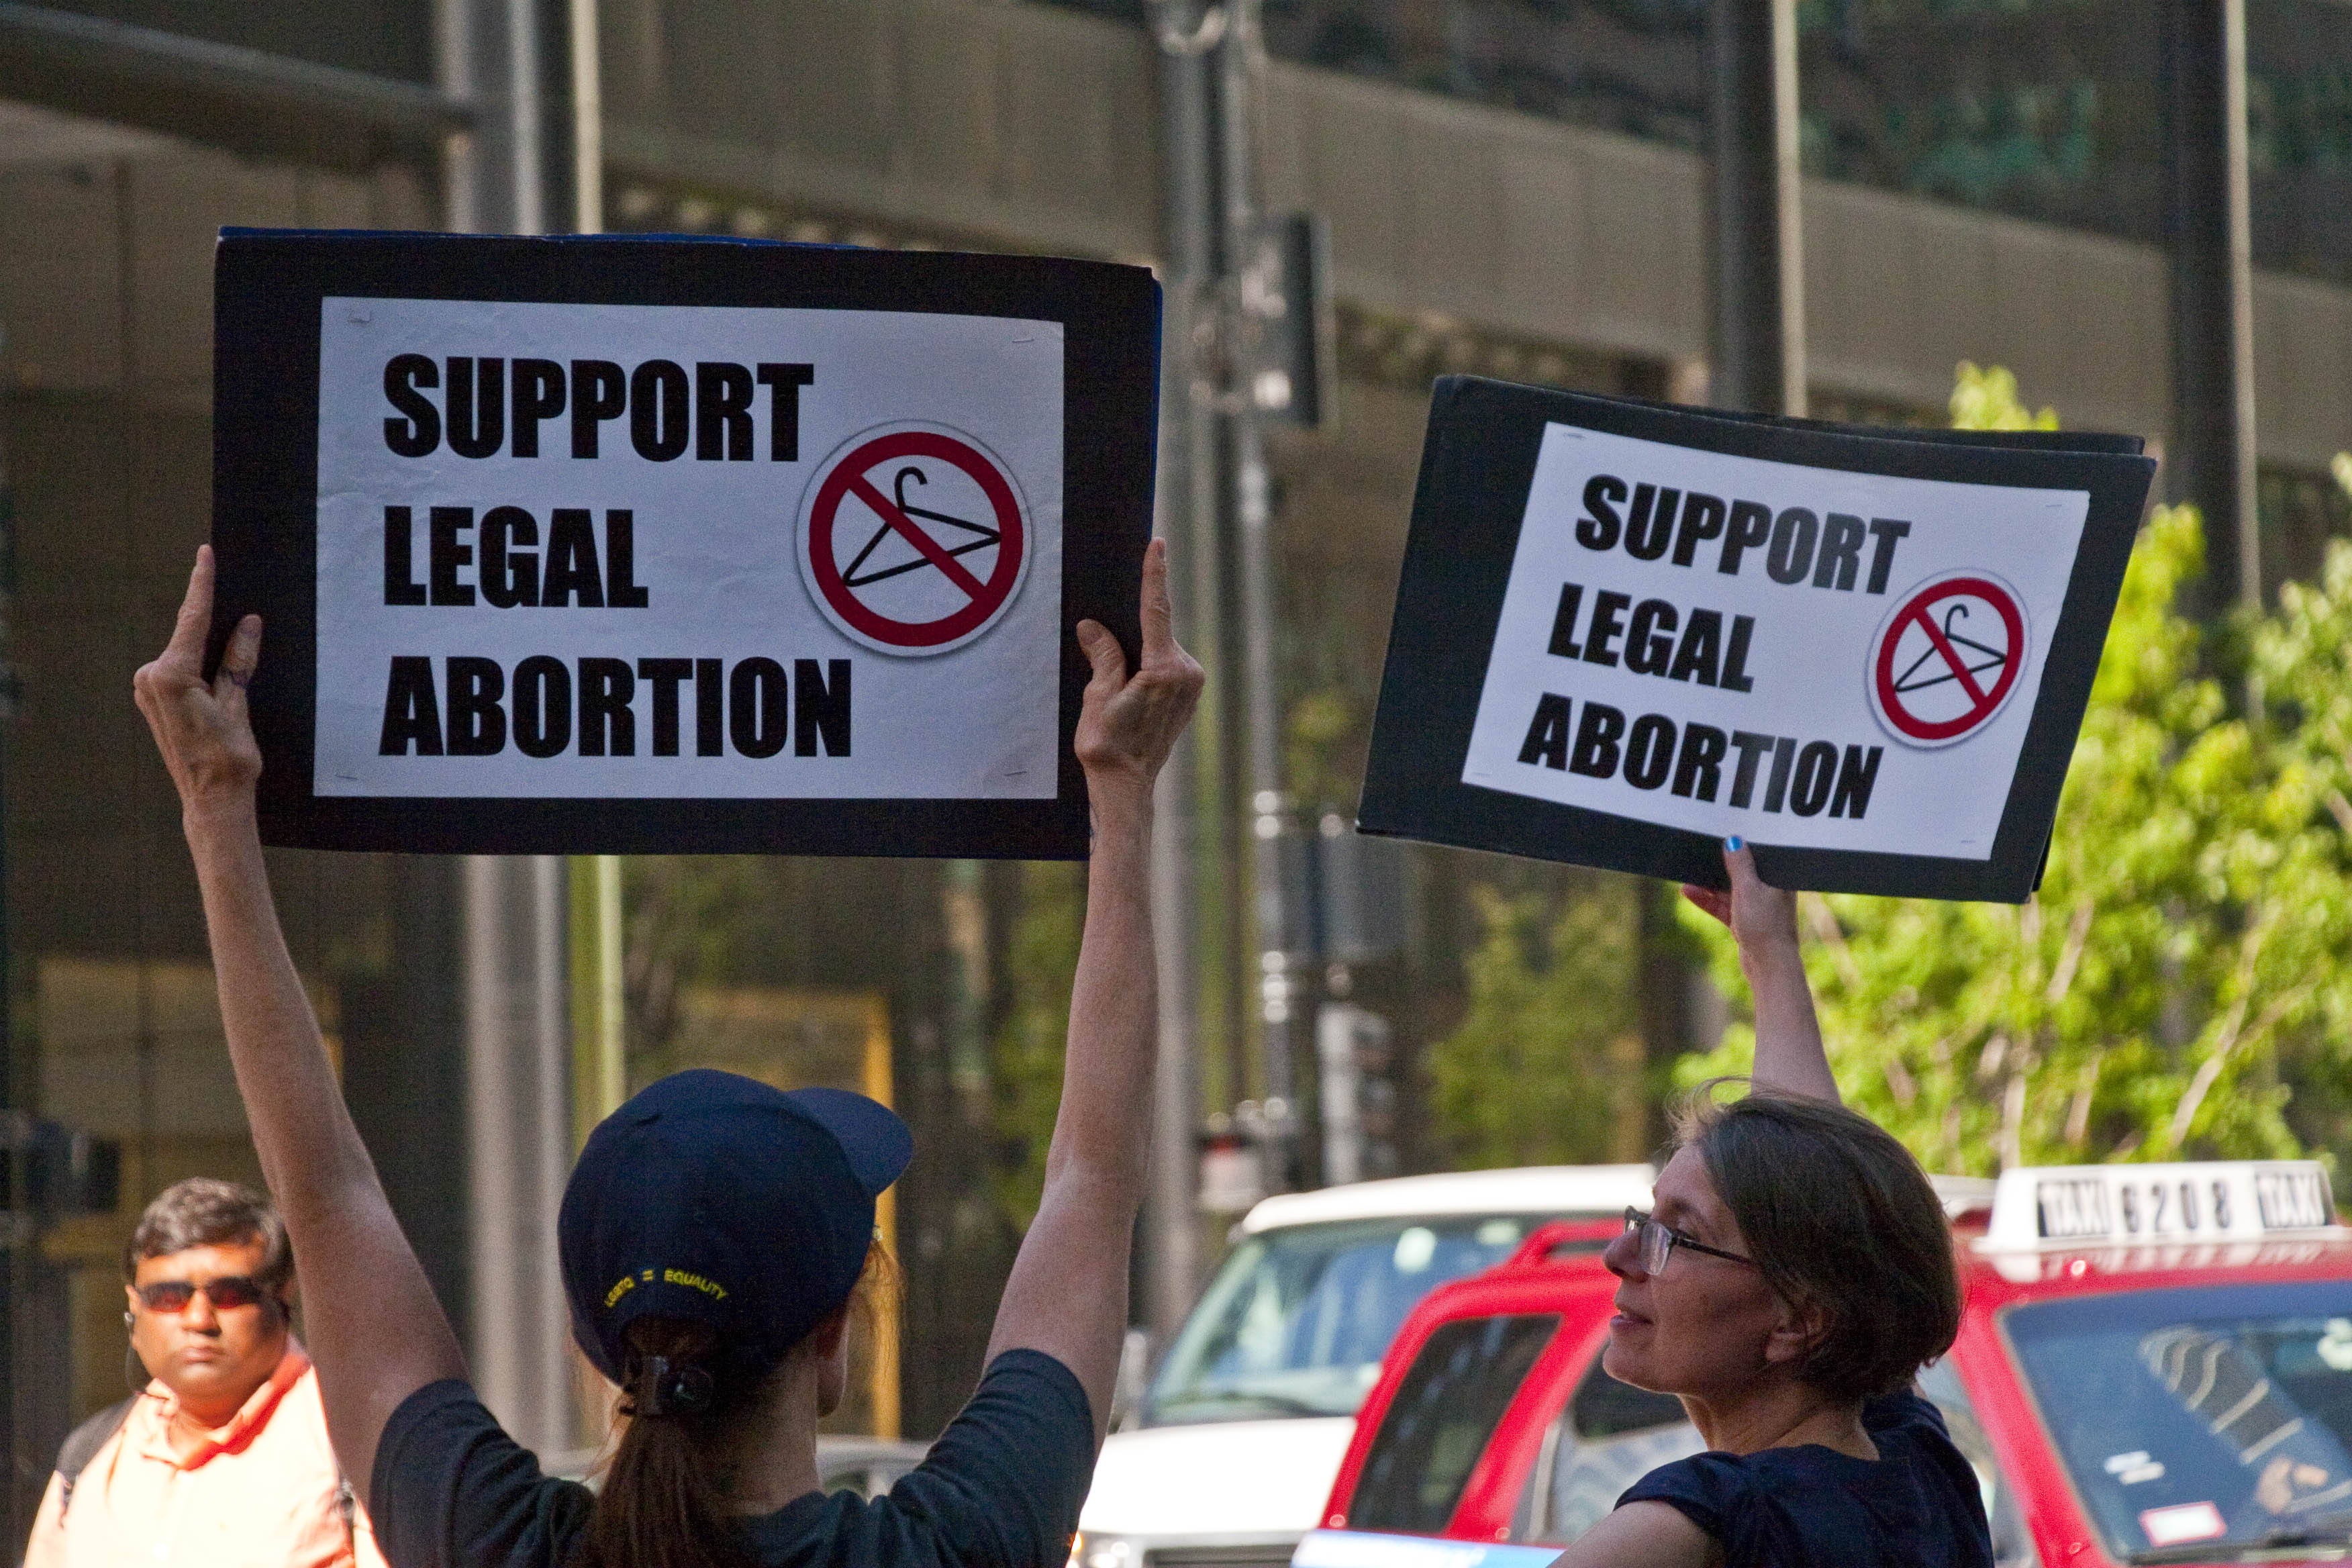 Support legal abortion. Photo by Charles Edward Miller. (CC BY-SA 2.0).